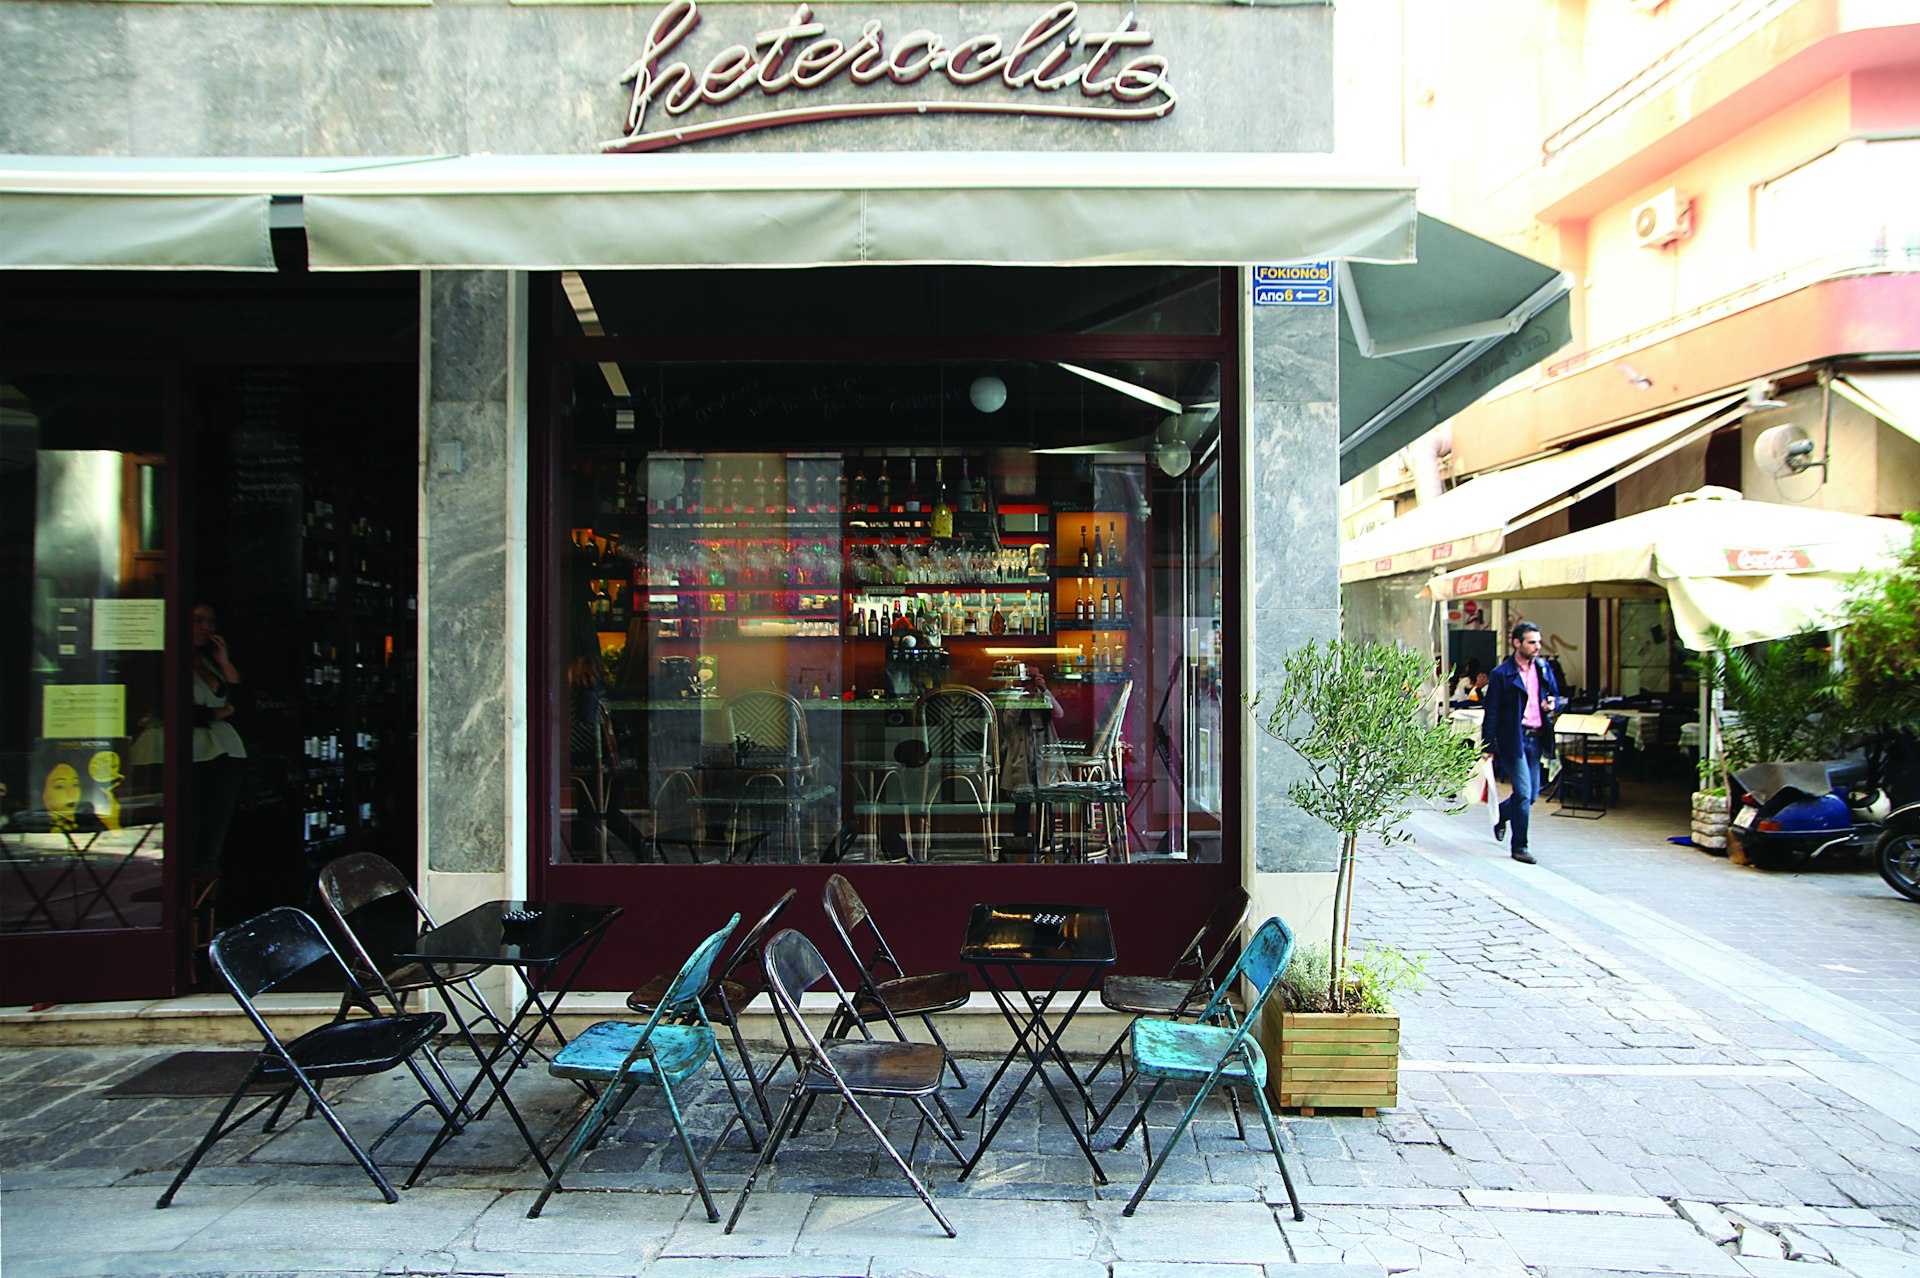 The silver exterior of the Hertoclito restaurnt in the Syntagma and Plaka neighborhood has blue and black cafe chairs out front and a small tree growing in a wooden planter box. Through the window you can see beautifully lit bottles behind the bar in dark, inviting tones. Outside, an Athenian man in jeans and a black jacket walks down the cobbled street